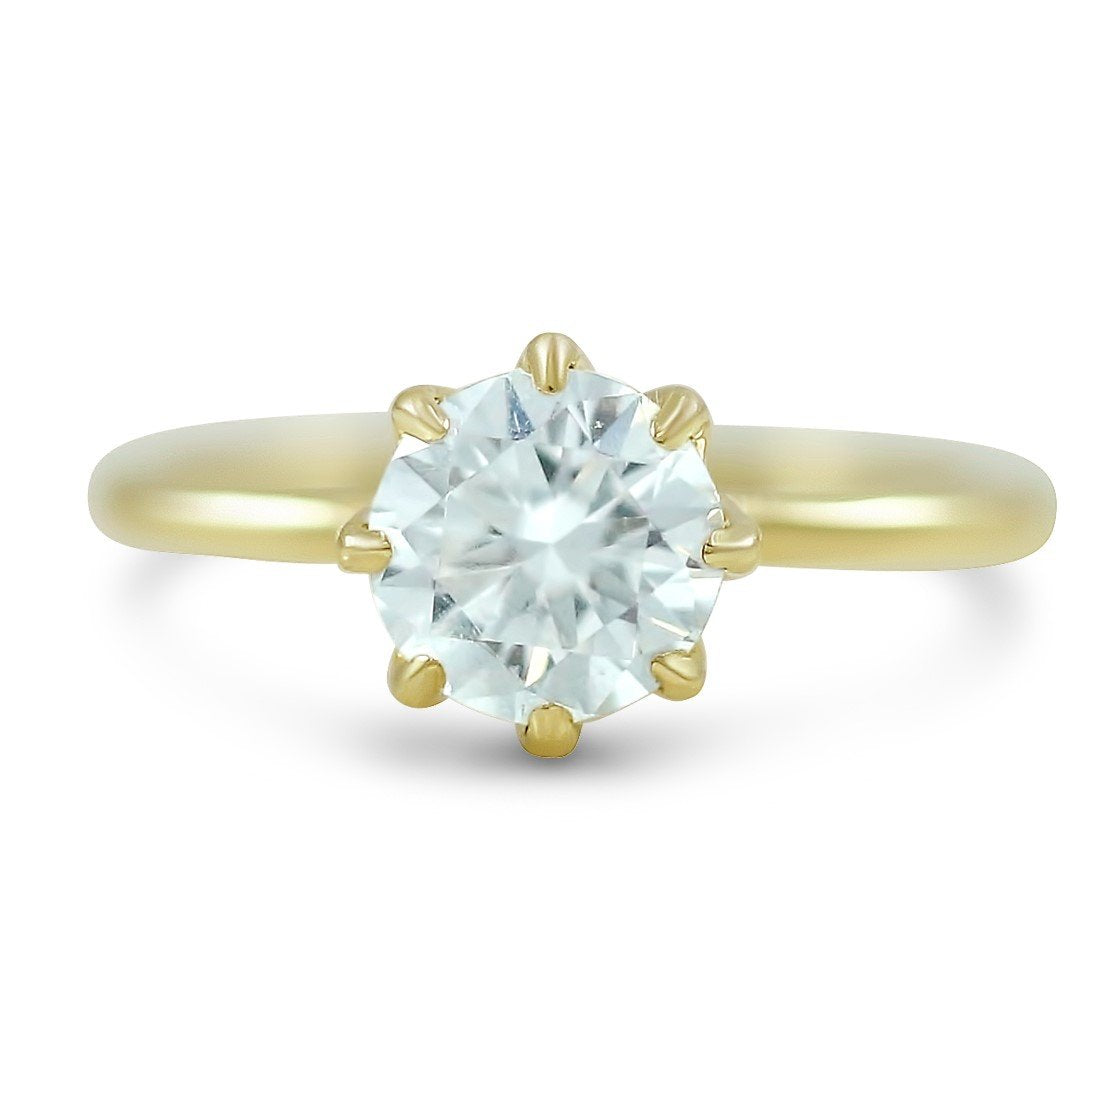 8 prong round diamond engagement ring with yellow gold band a hidden diamond halo also available in white or rose gold